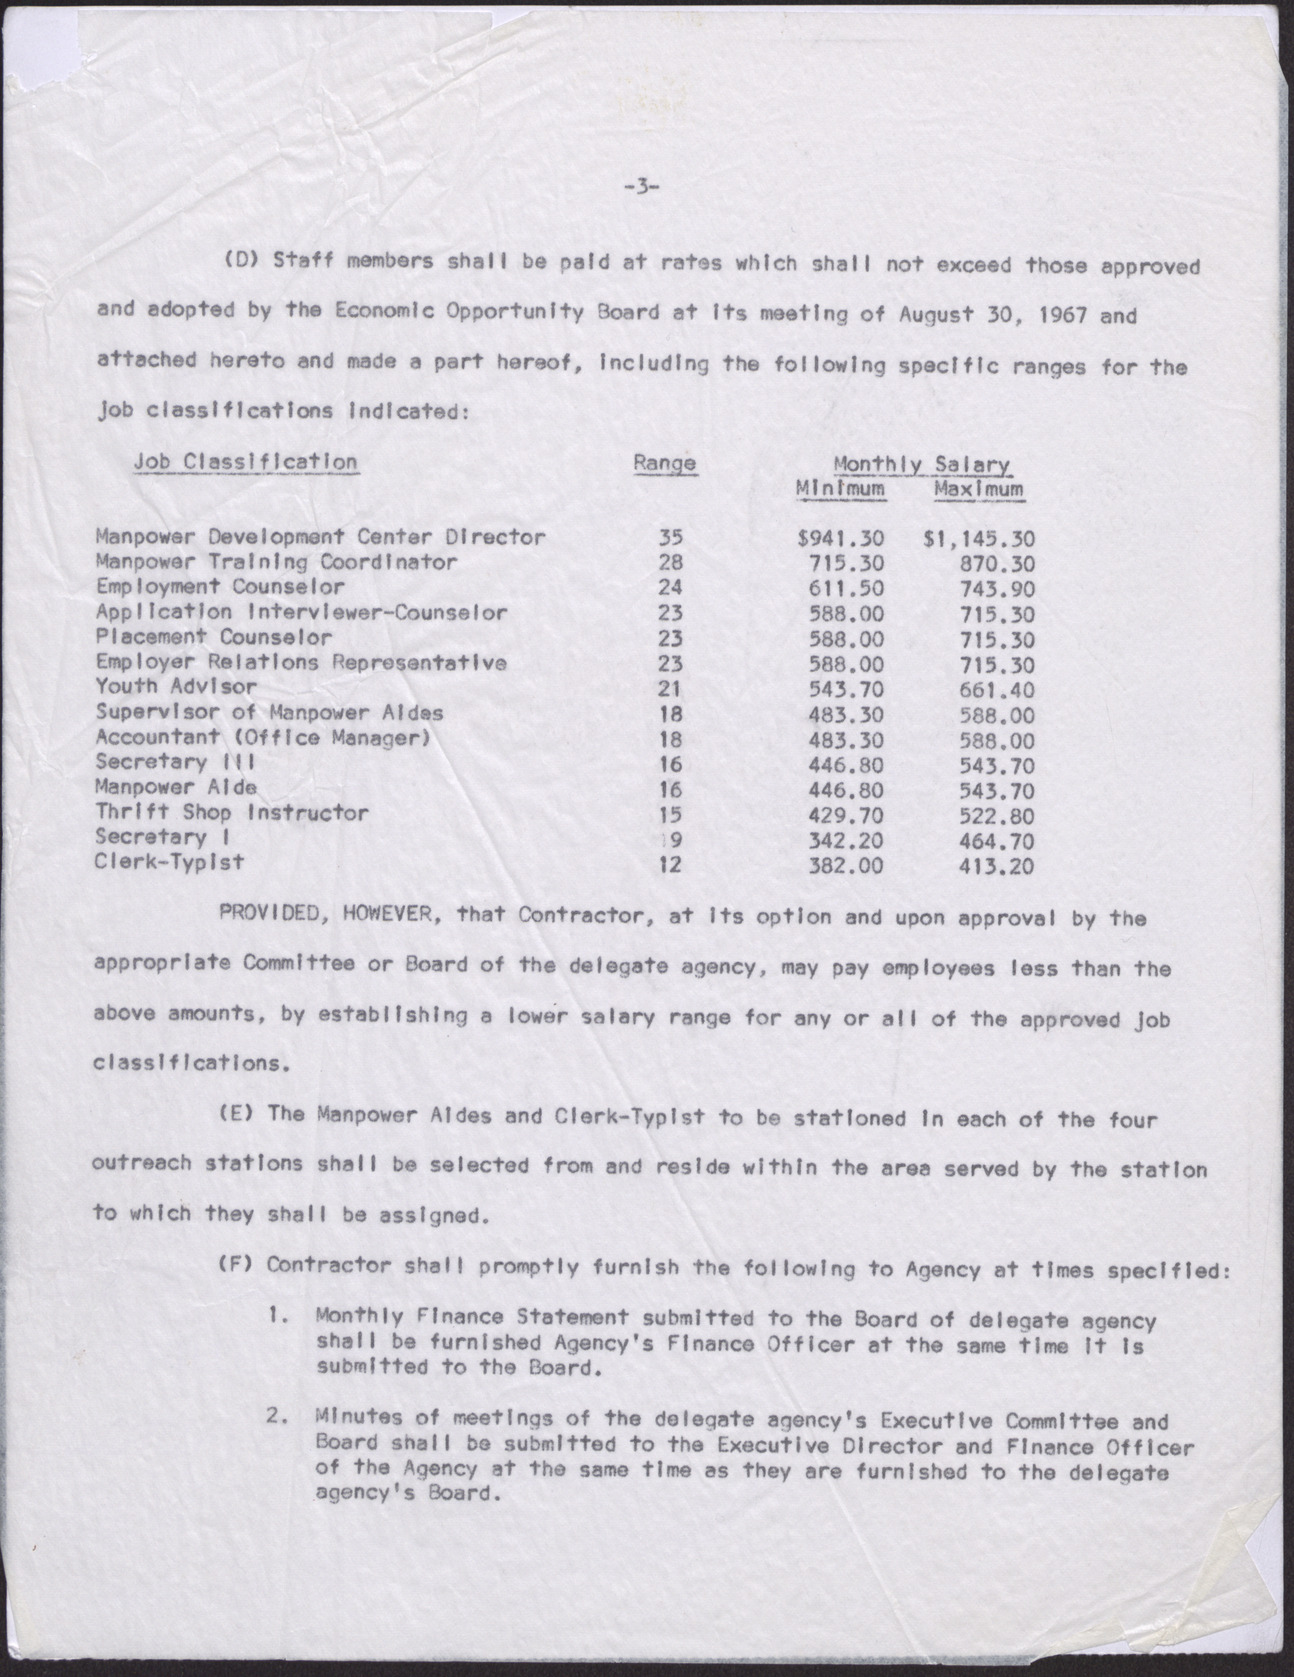 Page three of an unknown document related to jobs related to the Economic Opportunity Board, no date